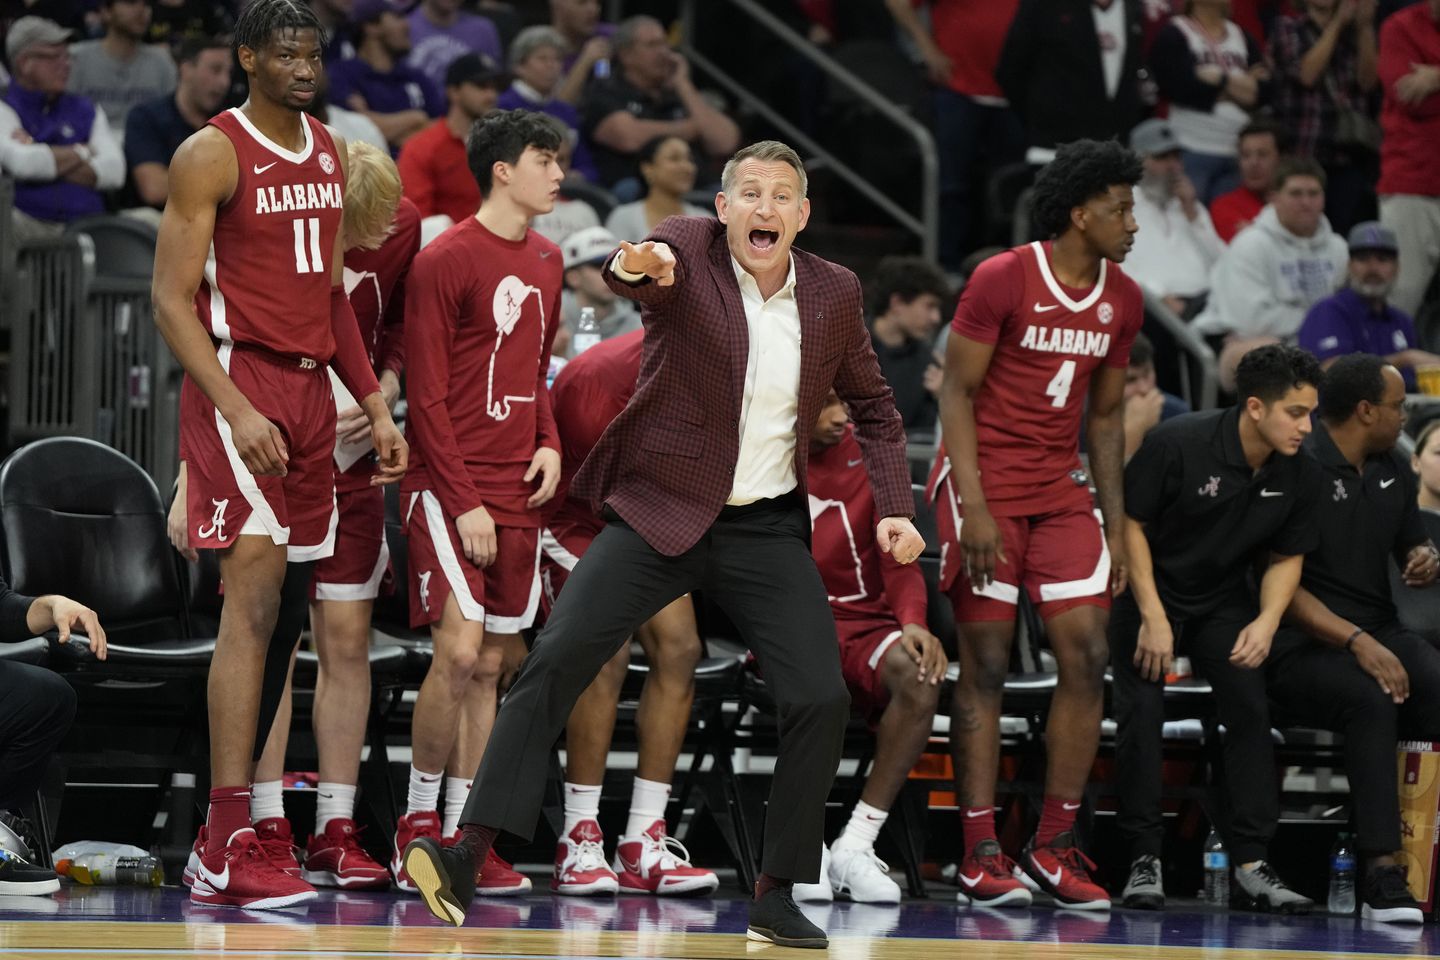 SEC reprimands Alabama coach Nate Oats for making contact with Missouri player
